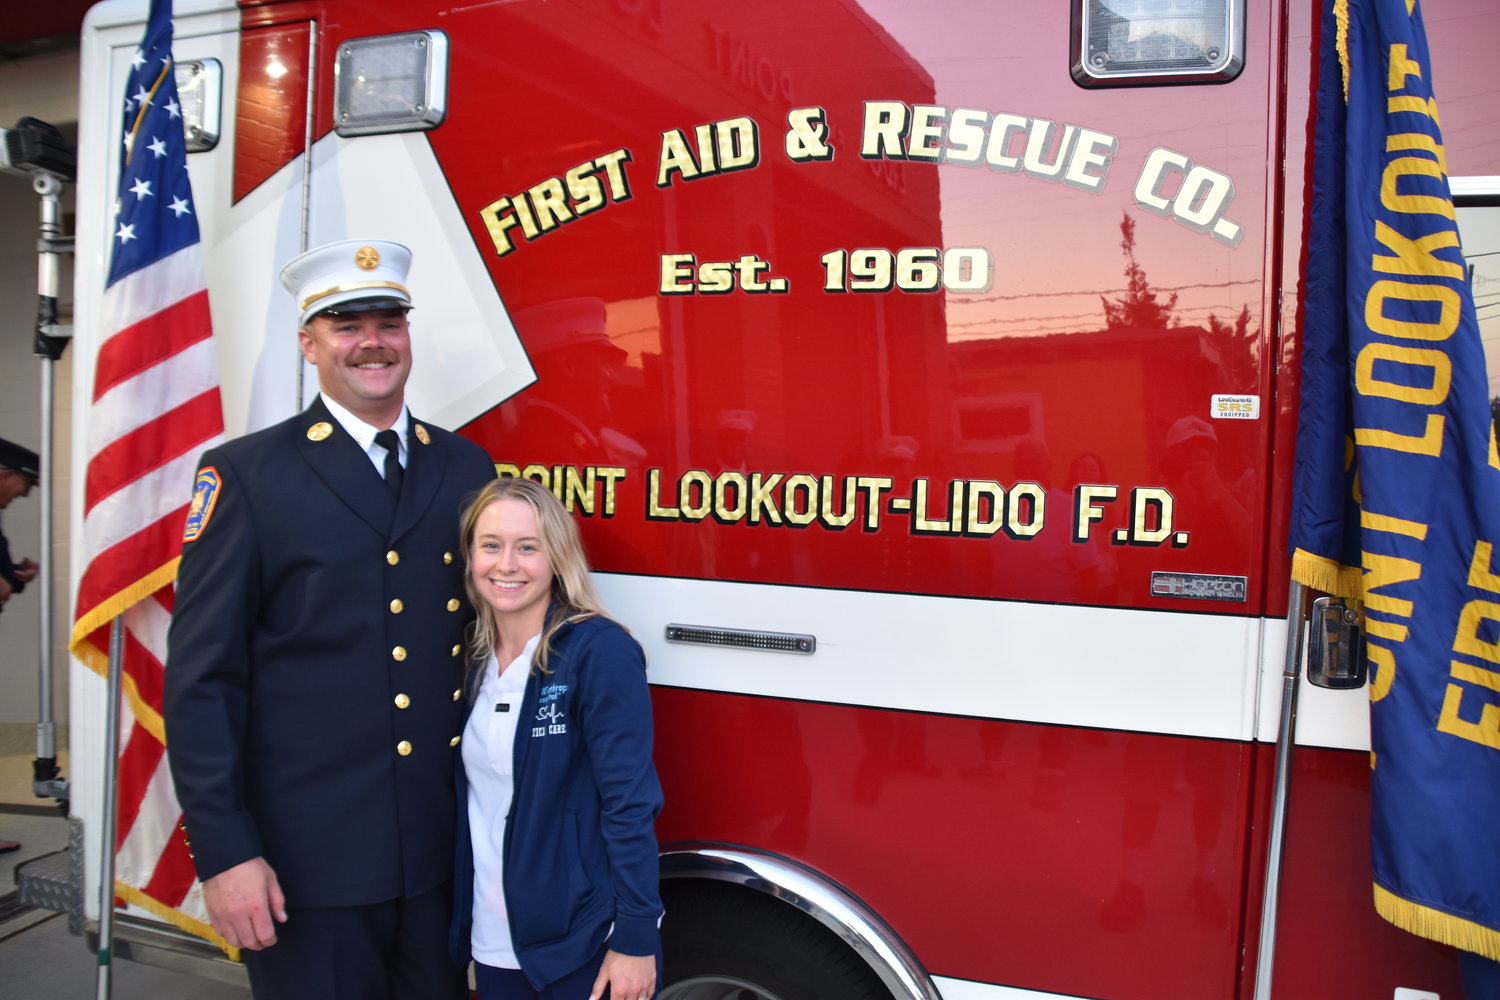 Peter Meyer, the second deputy chief at Point Lookout-Lido Fire Department, with his wife and Point Lookout-Lido FD EMT Elizabeth Eberhart-Meyer.